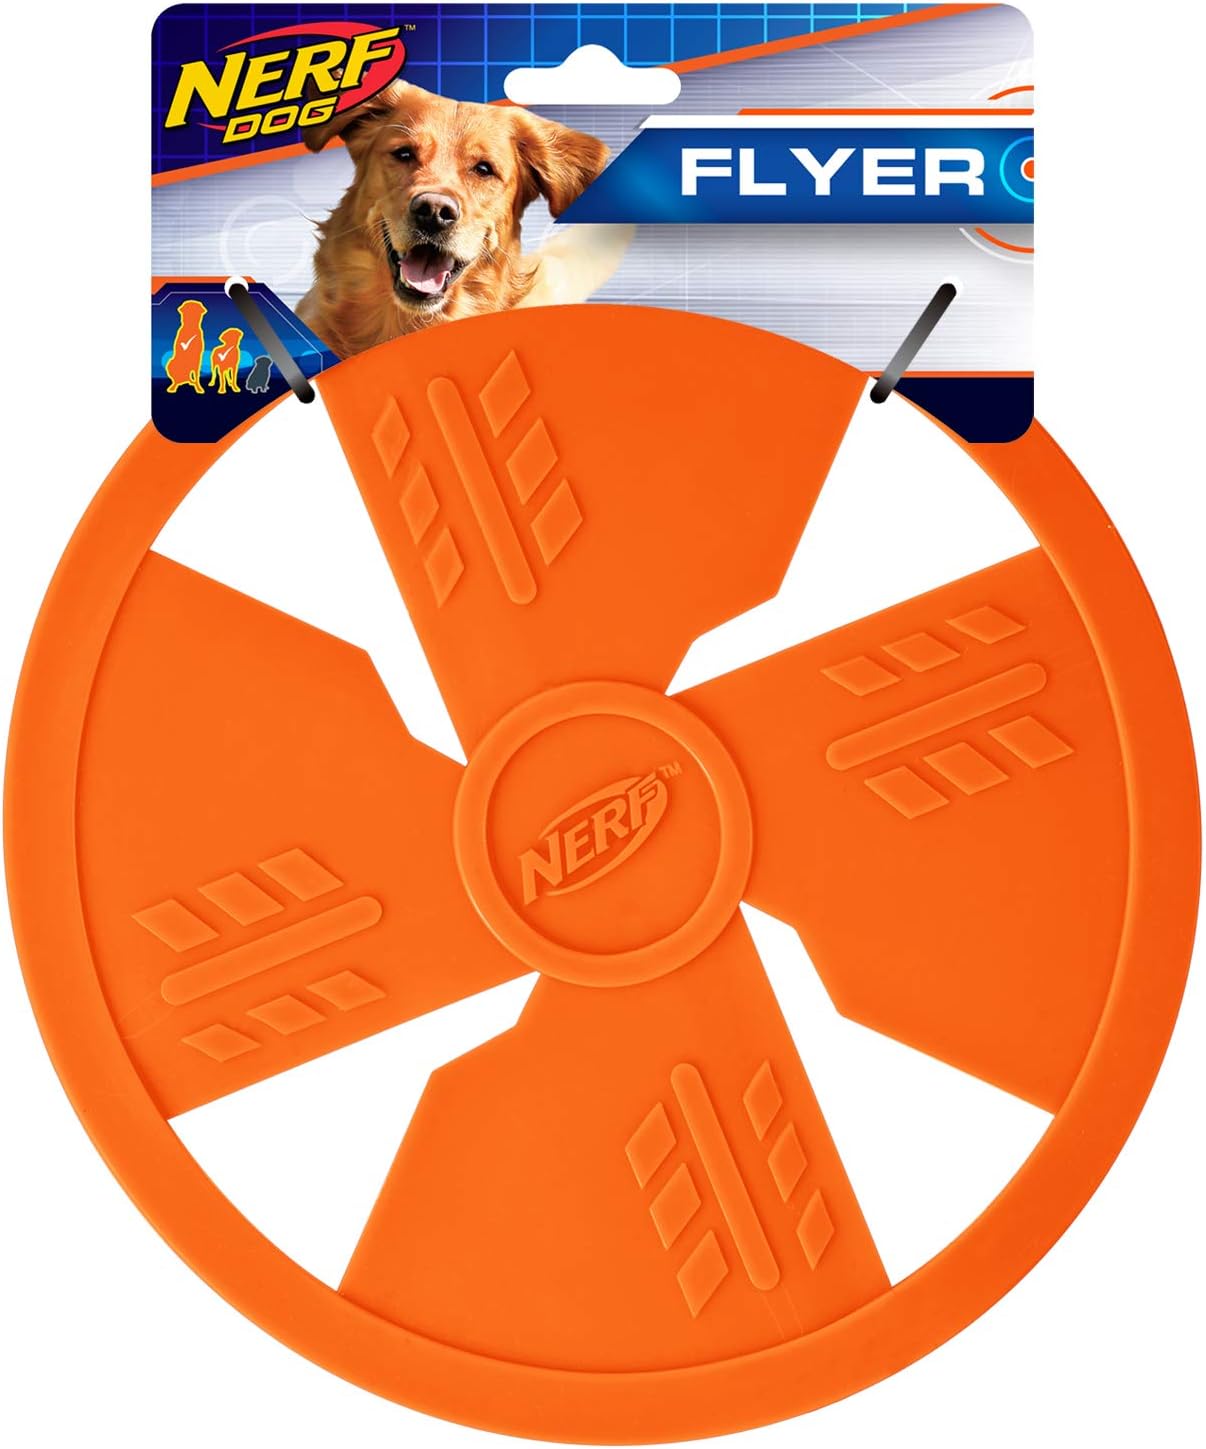 This is one of my dogs favorite toys. They are less durable then the previous version so I do need to replace them frequently, and need to have more than a few on hand at a time. My dogs do love them though and it is their toy of choice for playtime. Will continue to order.